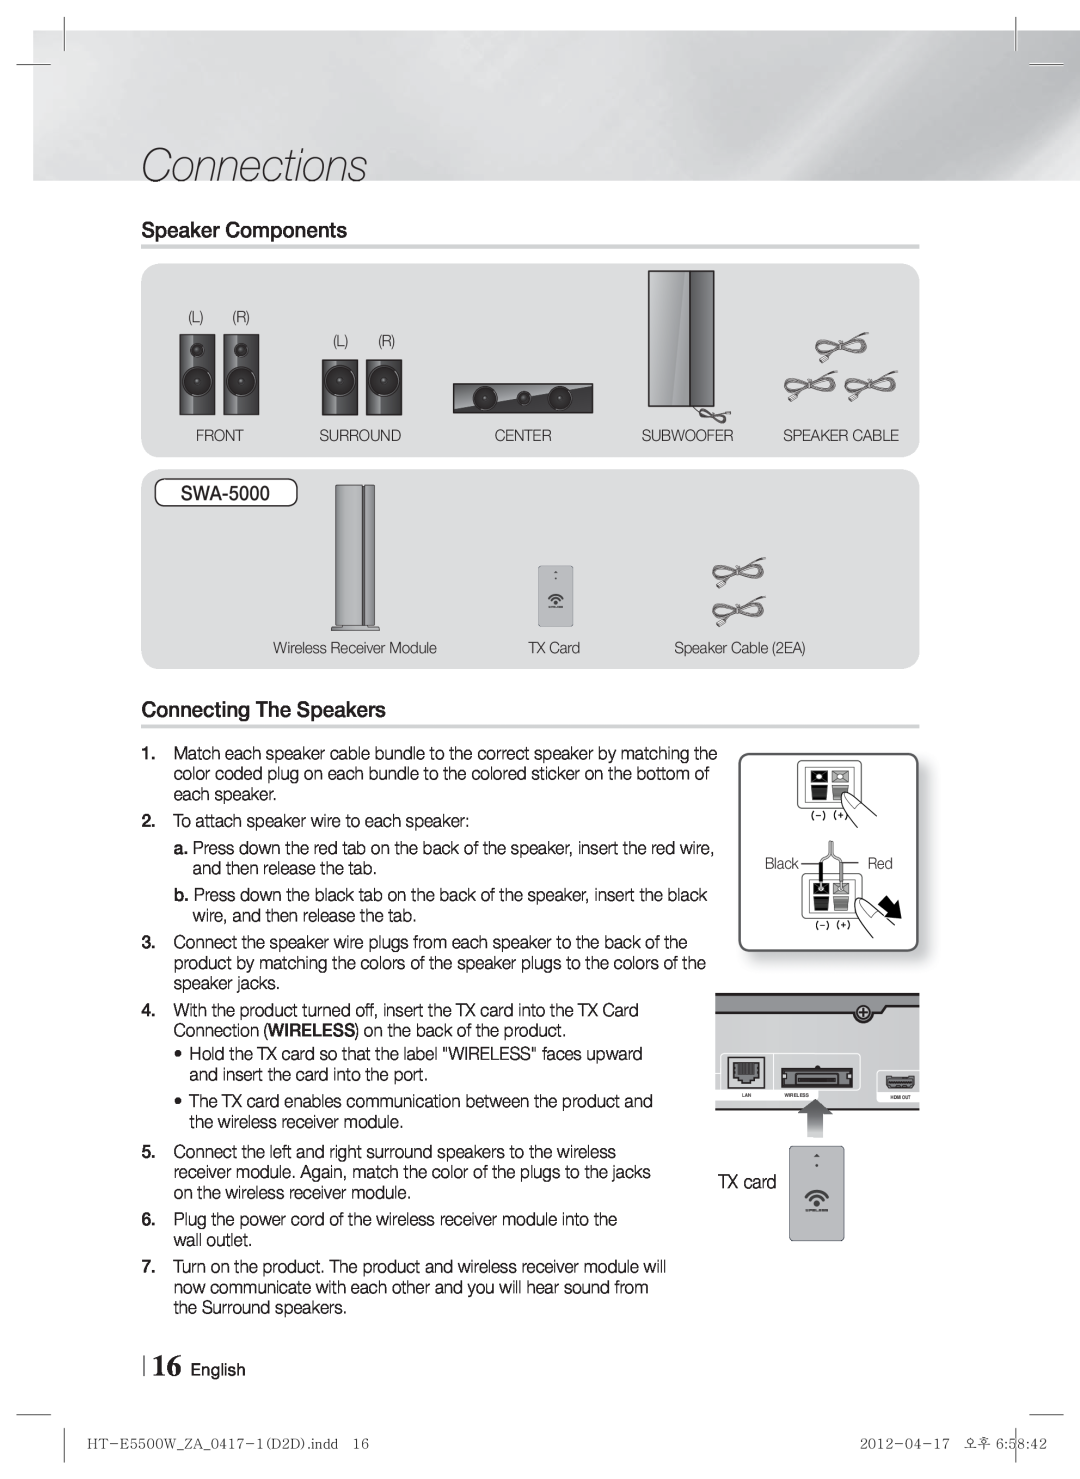 Samsung HT-E550 user manual Connections, Speaker Components, Connecting The Speakers, SWA-5000 